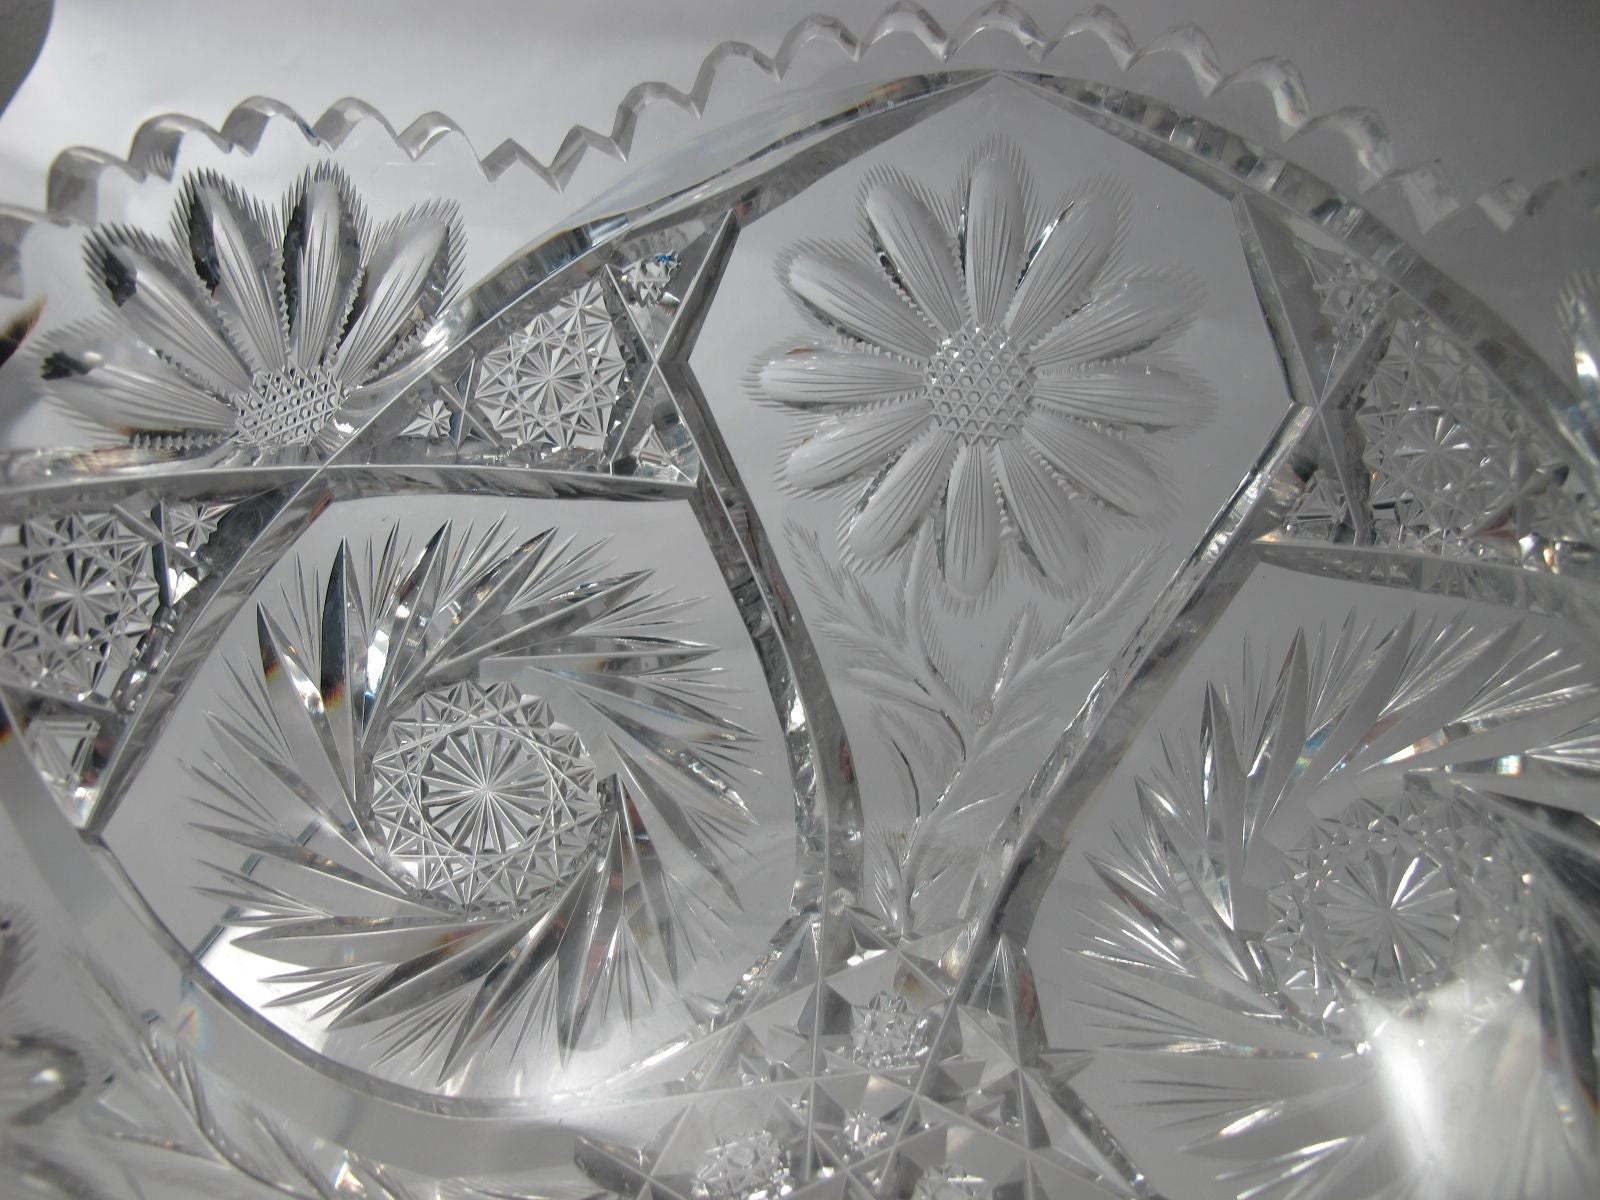 American Brilliant Period hand Cut Glass bowl ABP antique Anderson? - O'Rourke crystal awards & gifts abp cut glass